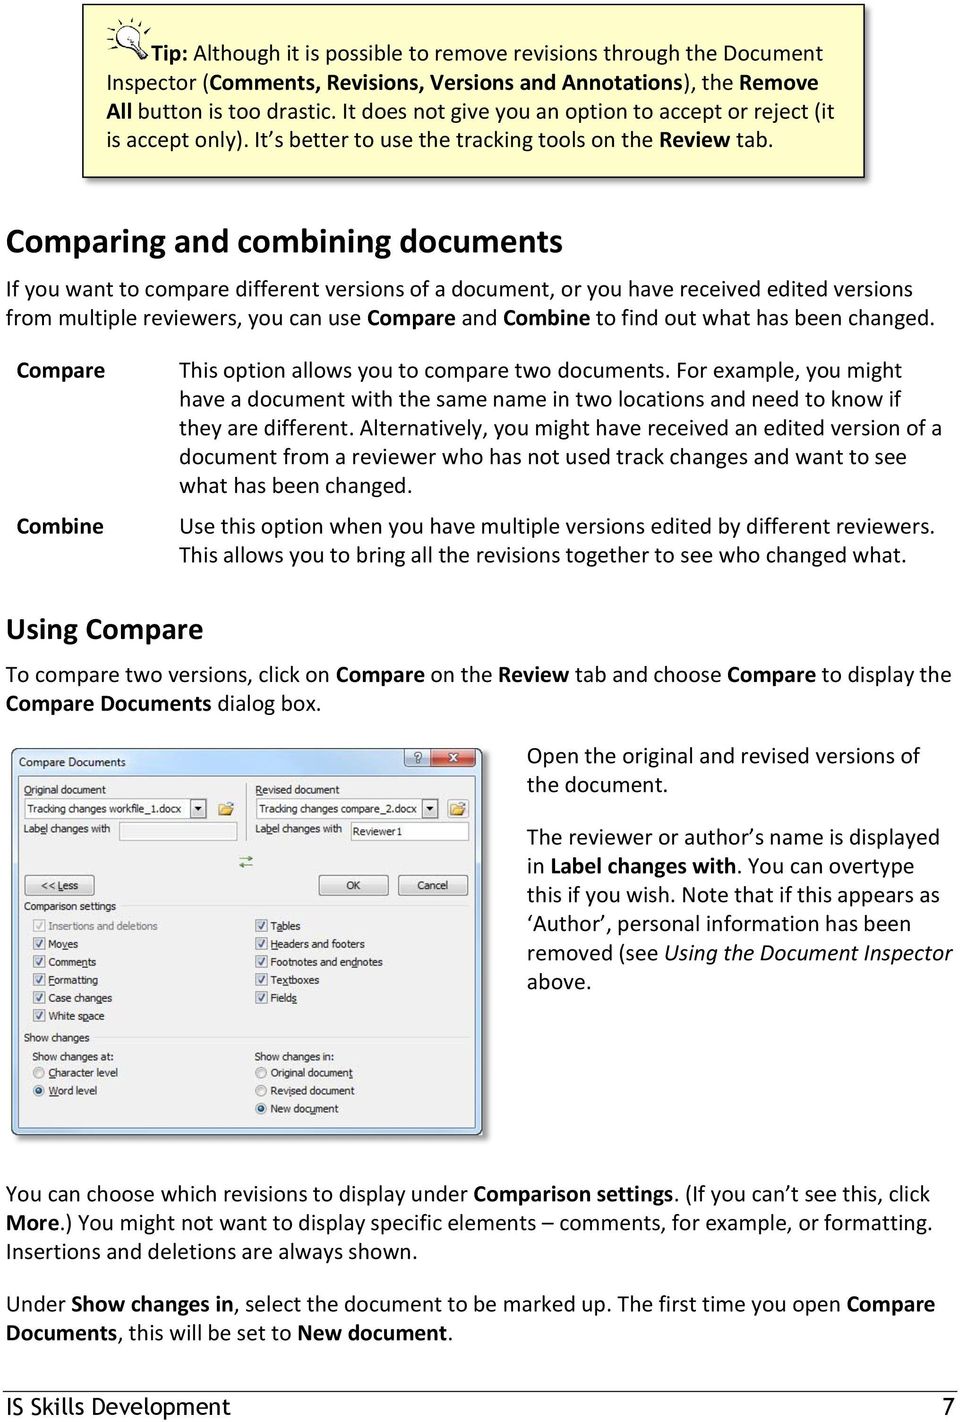 Comparing and combining documents If you want to compare different versions of a document, or you have received edited versions from multiple reviewers, you can use Compare and Combine to find out